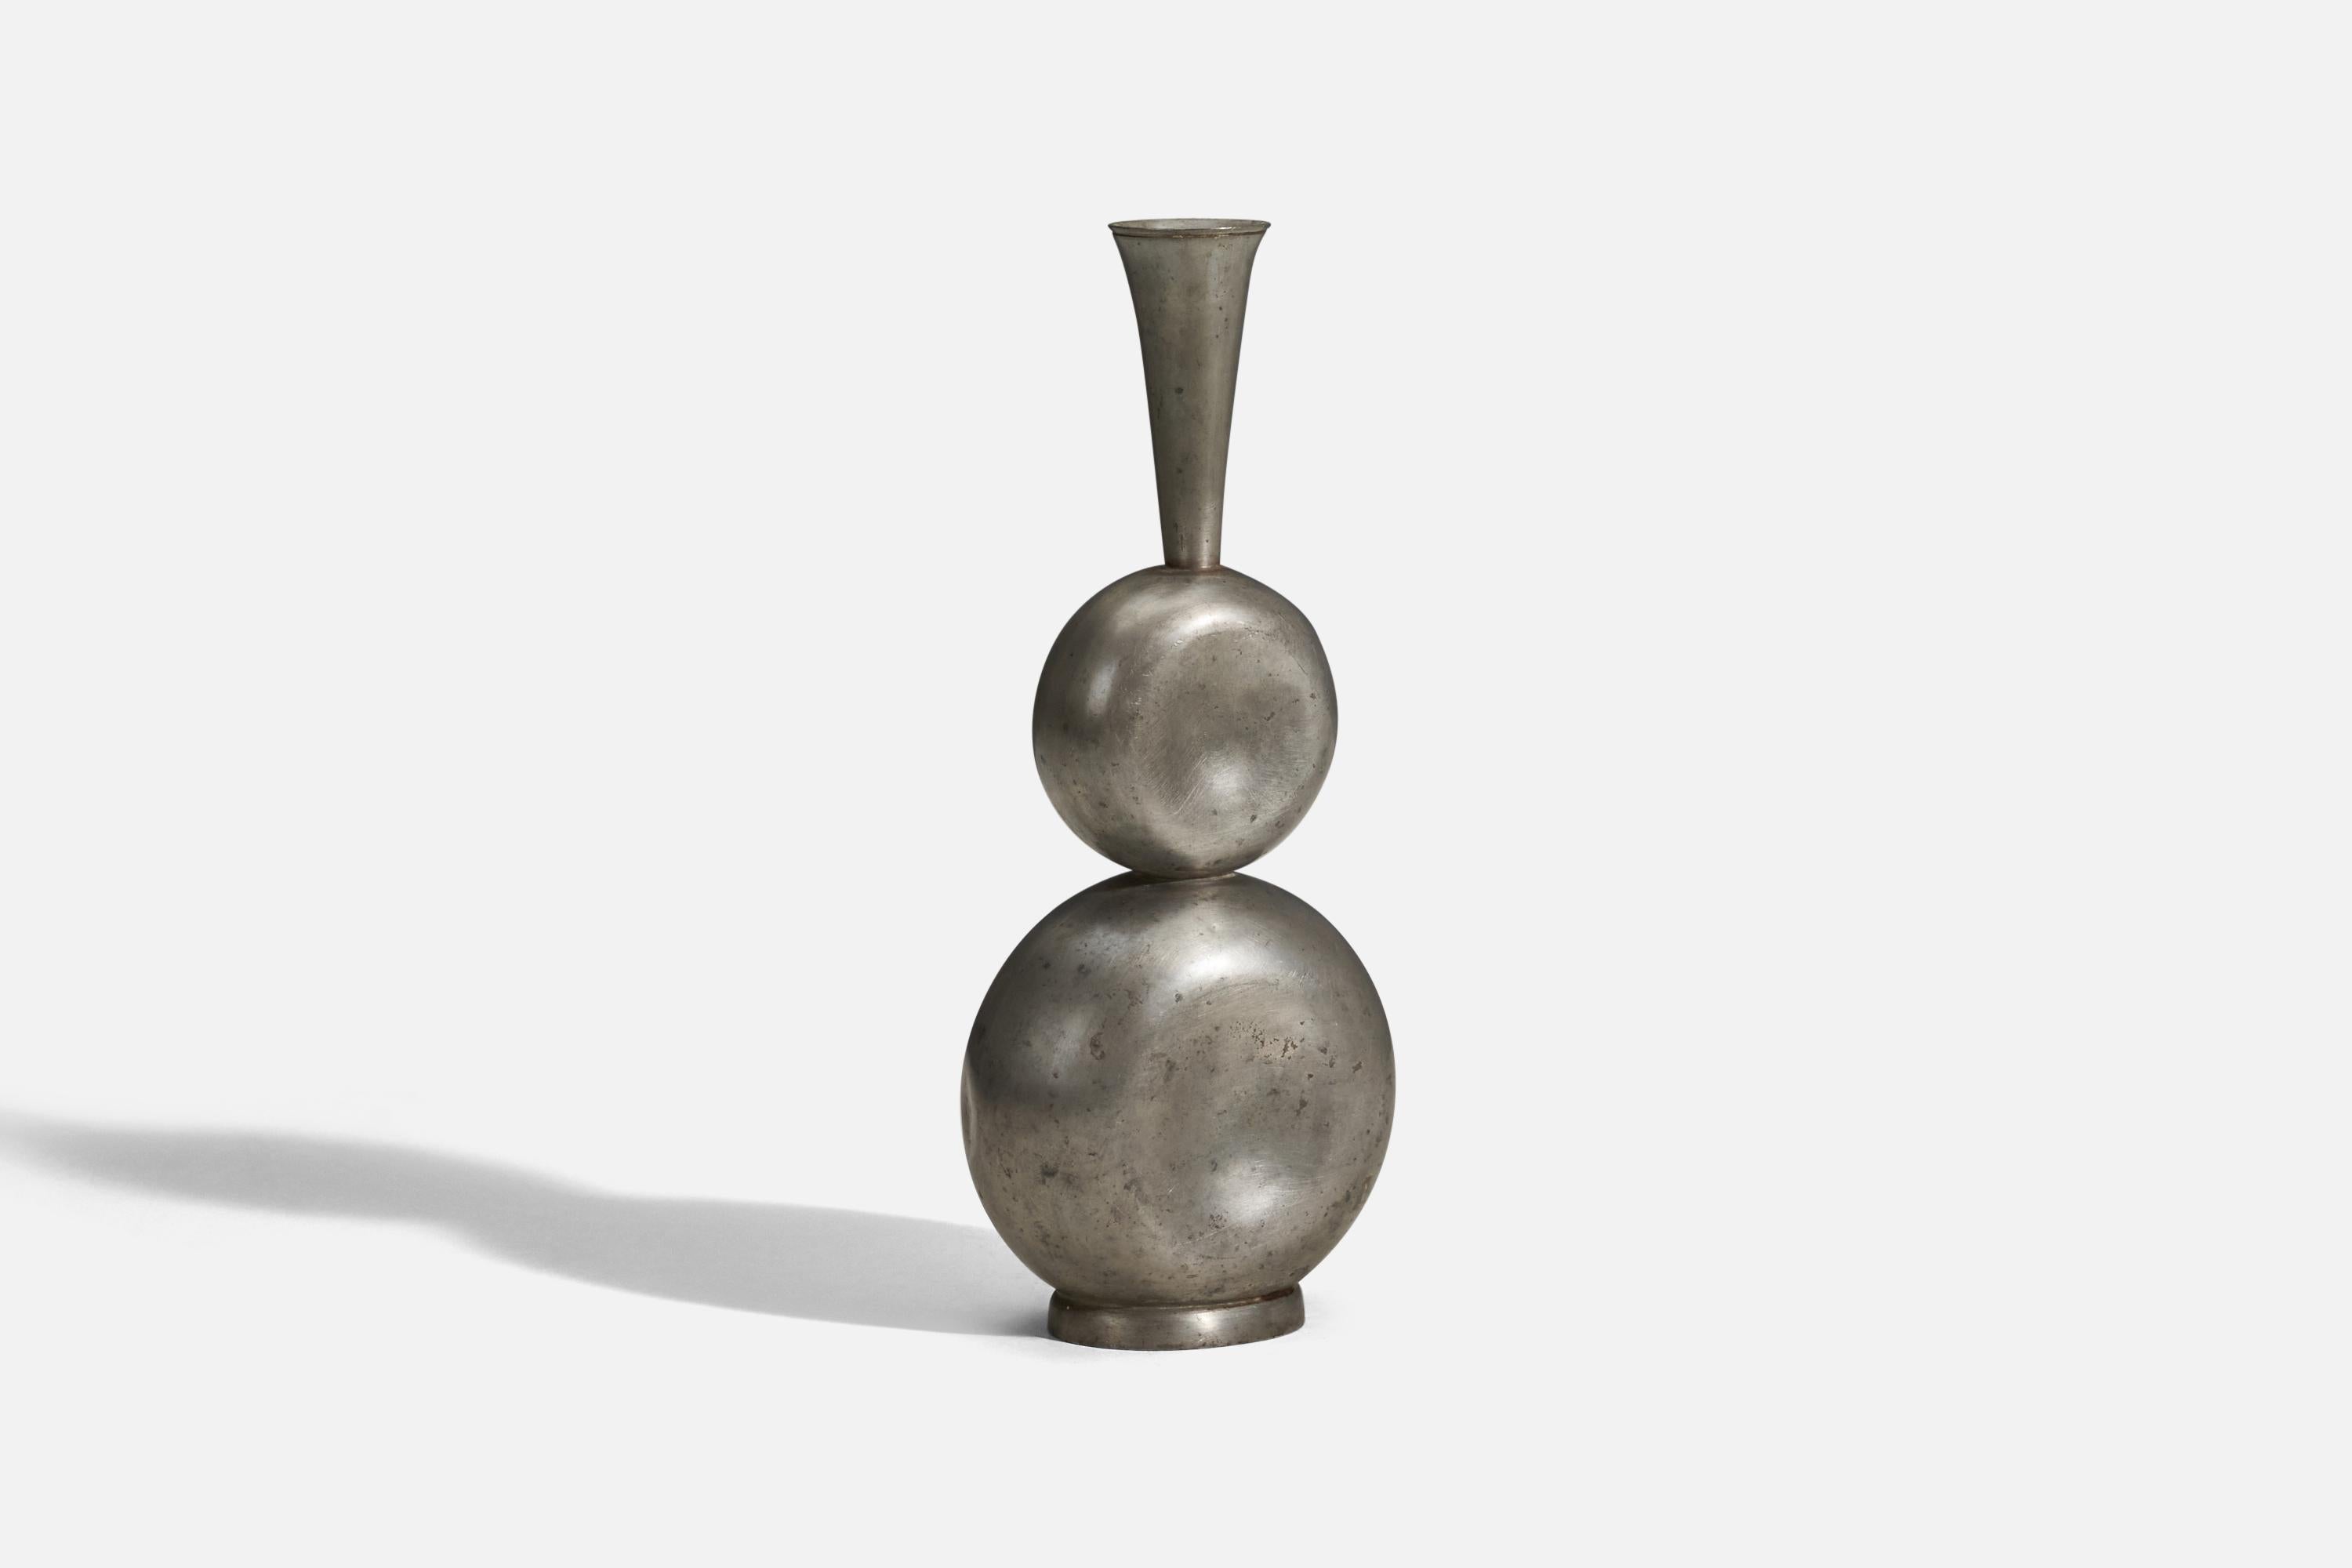 A pewter vase designed and produced by Gunnar Havstad, Norway, 1950s.